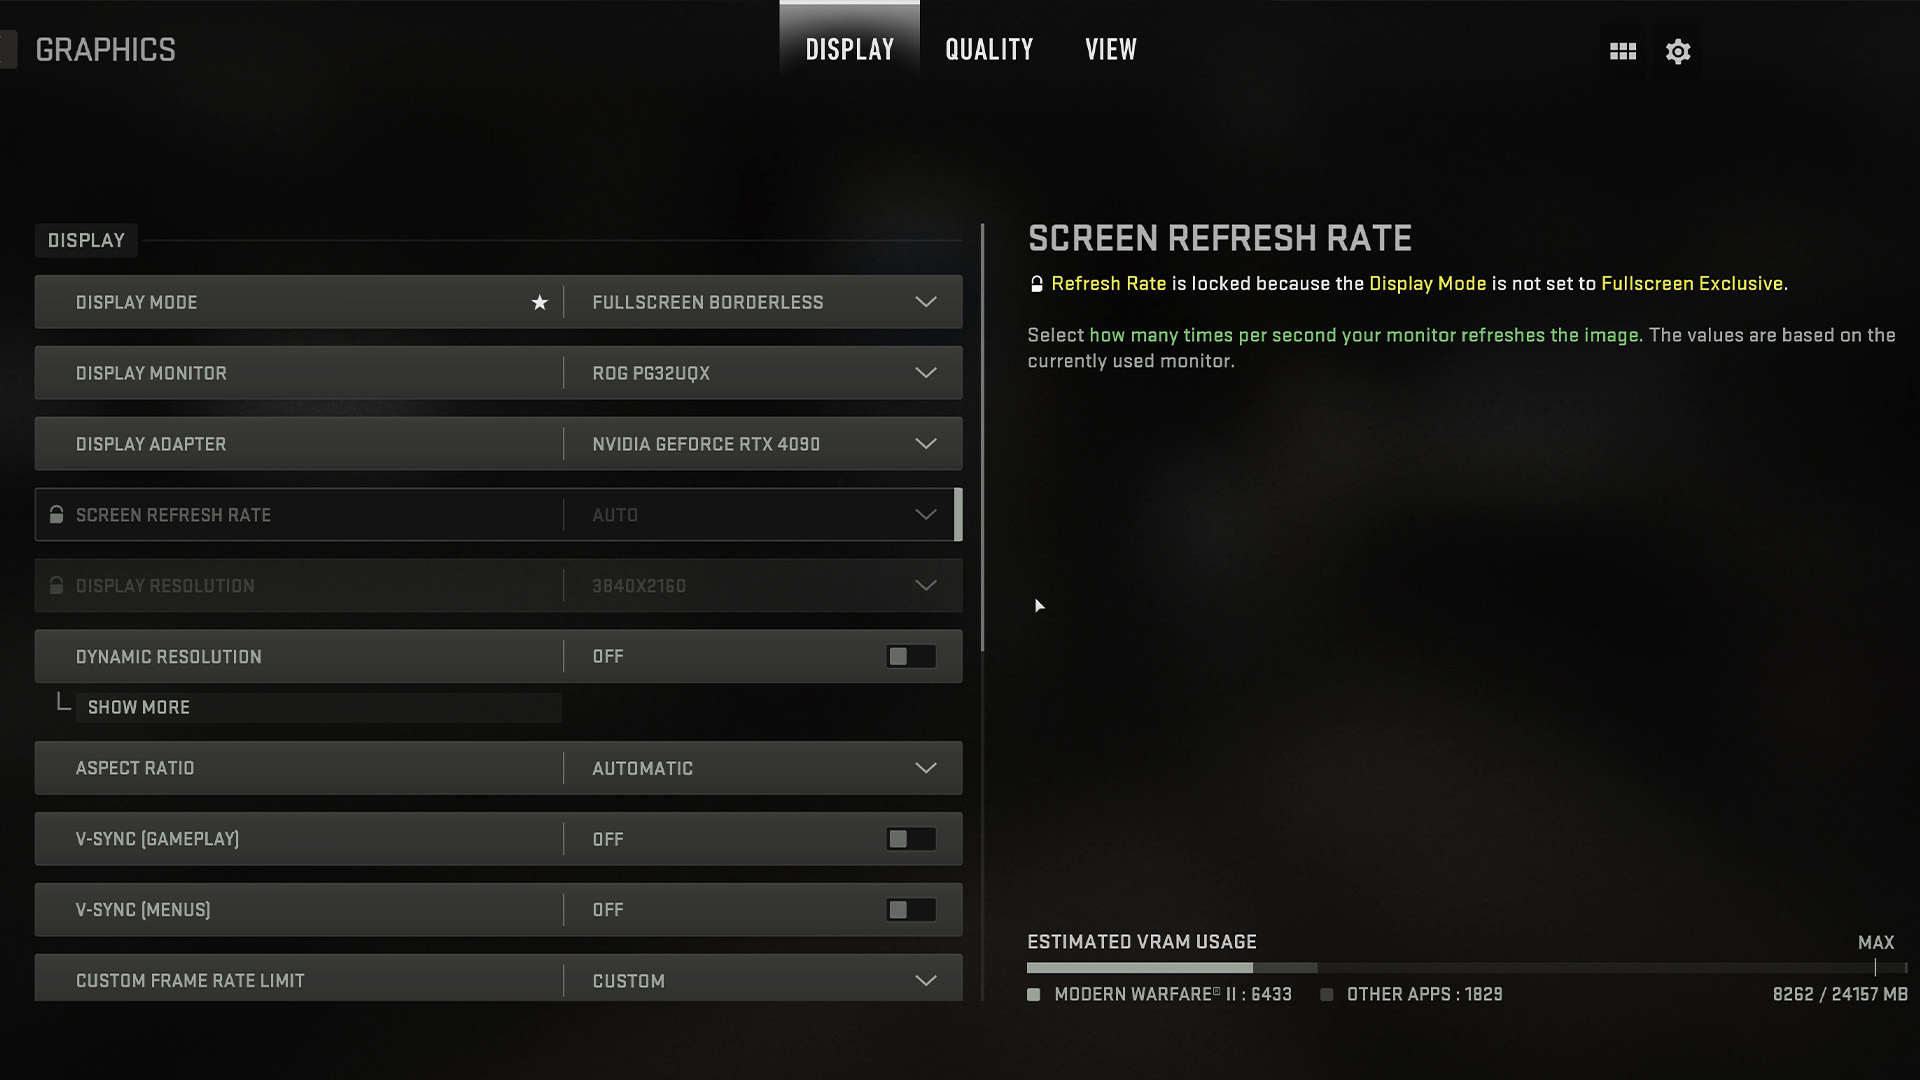 How to play Modern Warfare 2 on Steam Deck? Optimal settings, expected  performance, and more